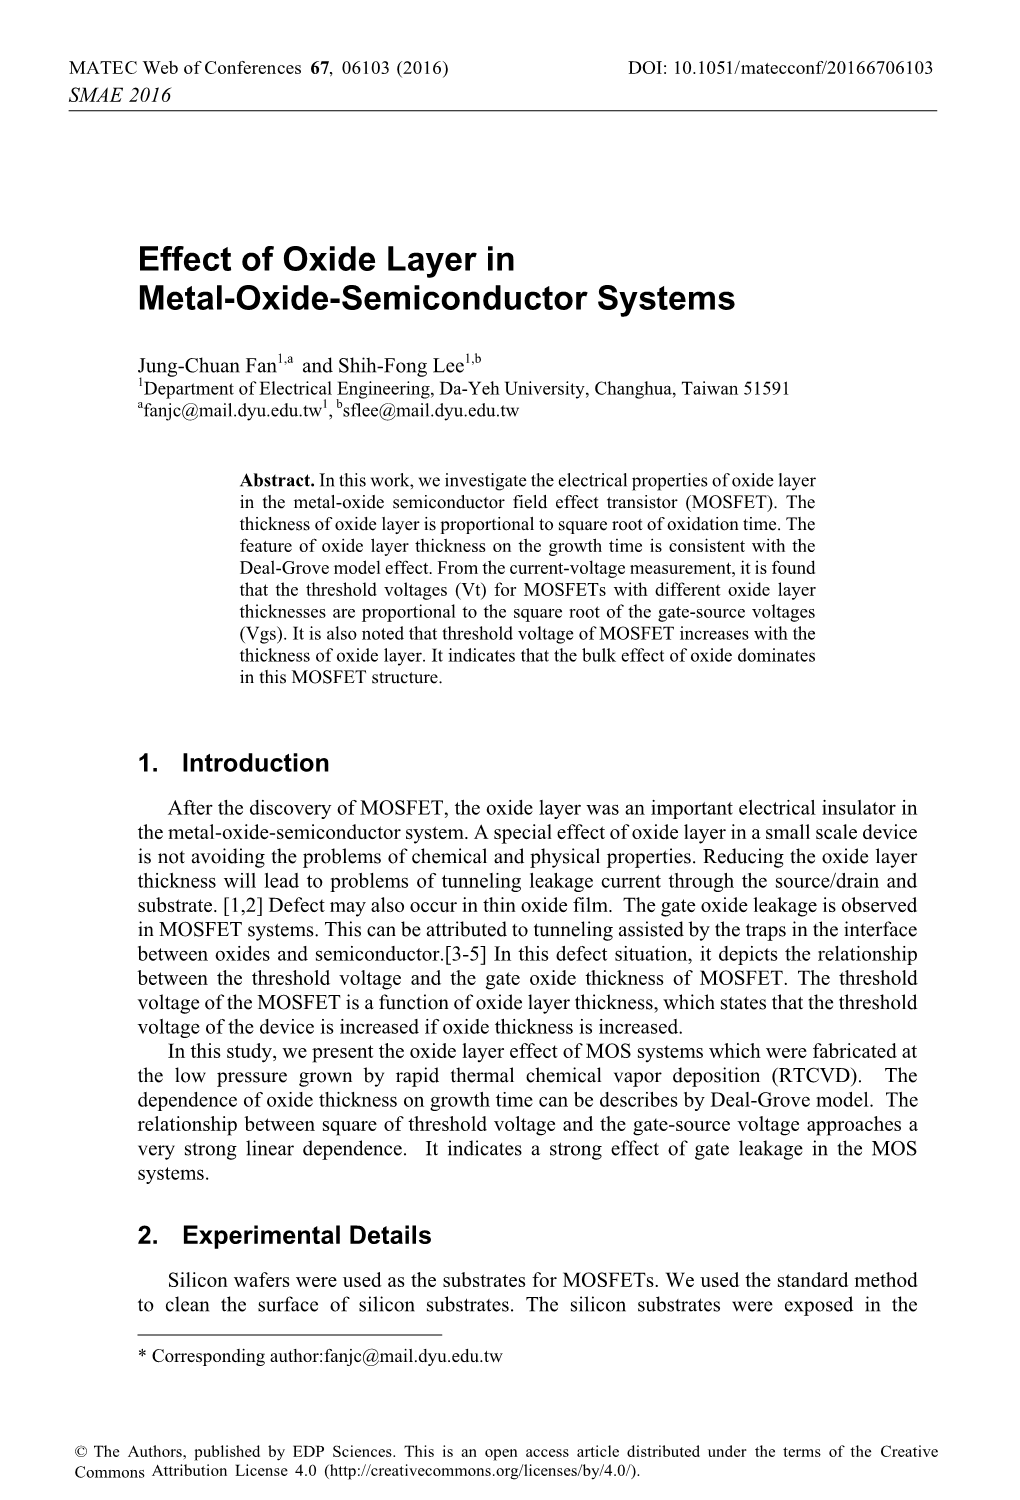 Effect of Oxide Layer in Metal-Oxide-Semiconductor Systems